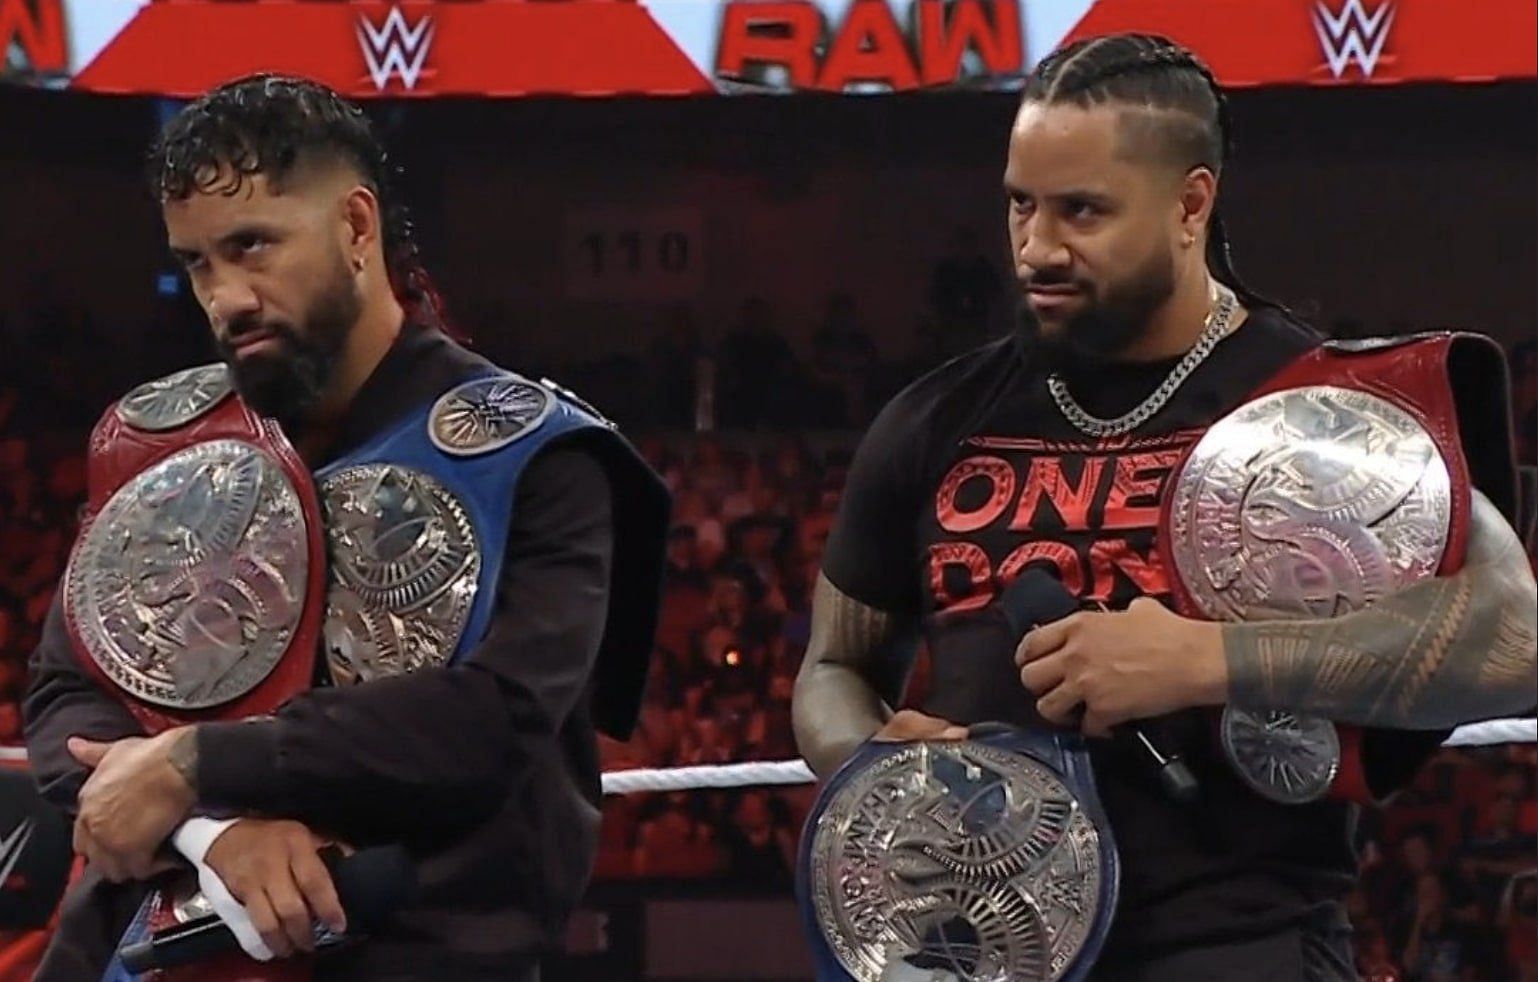 The Usos will try to extend their historic run at SummerSlam.